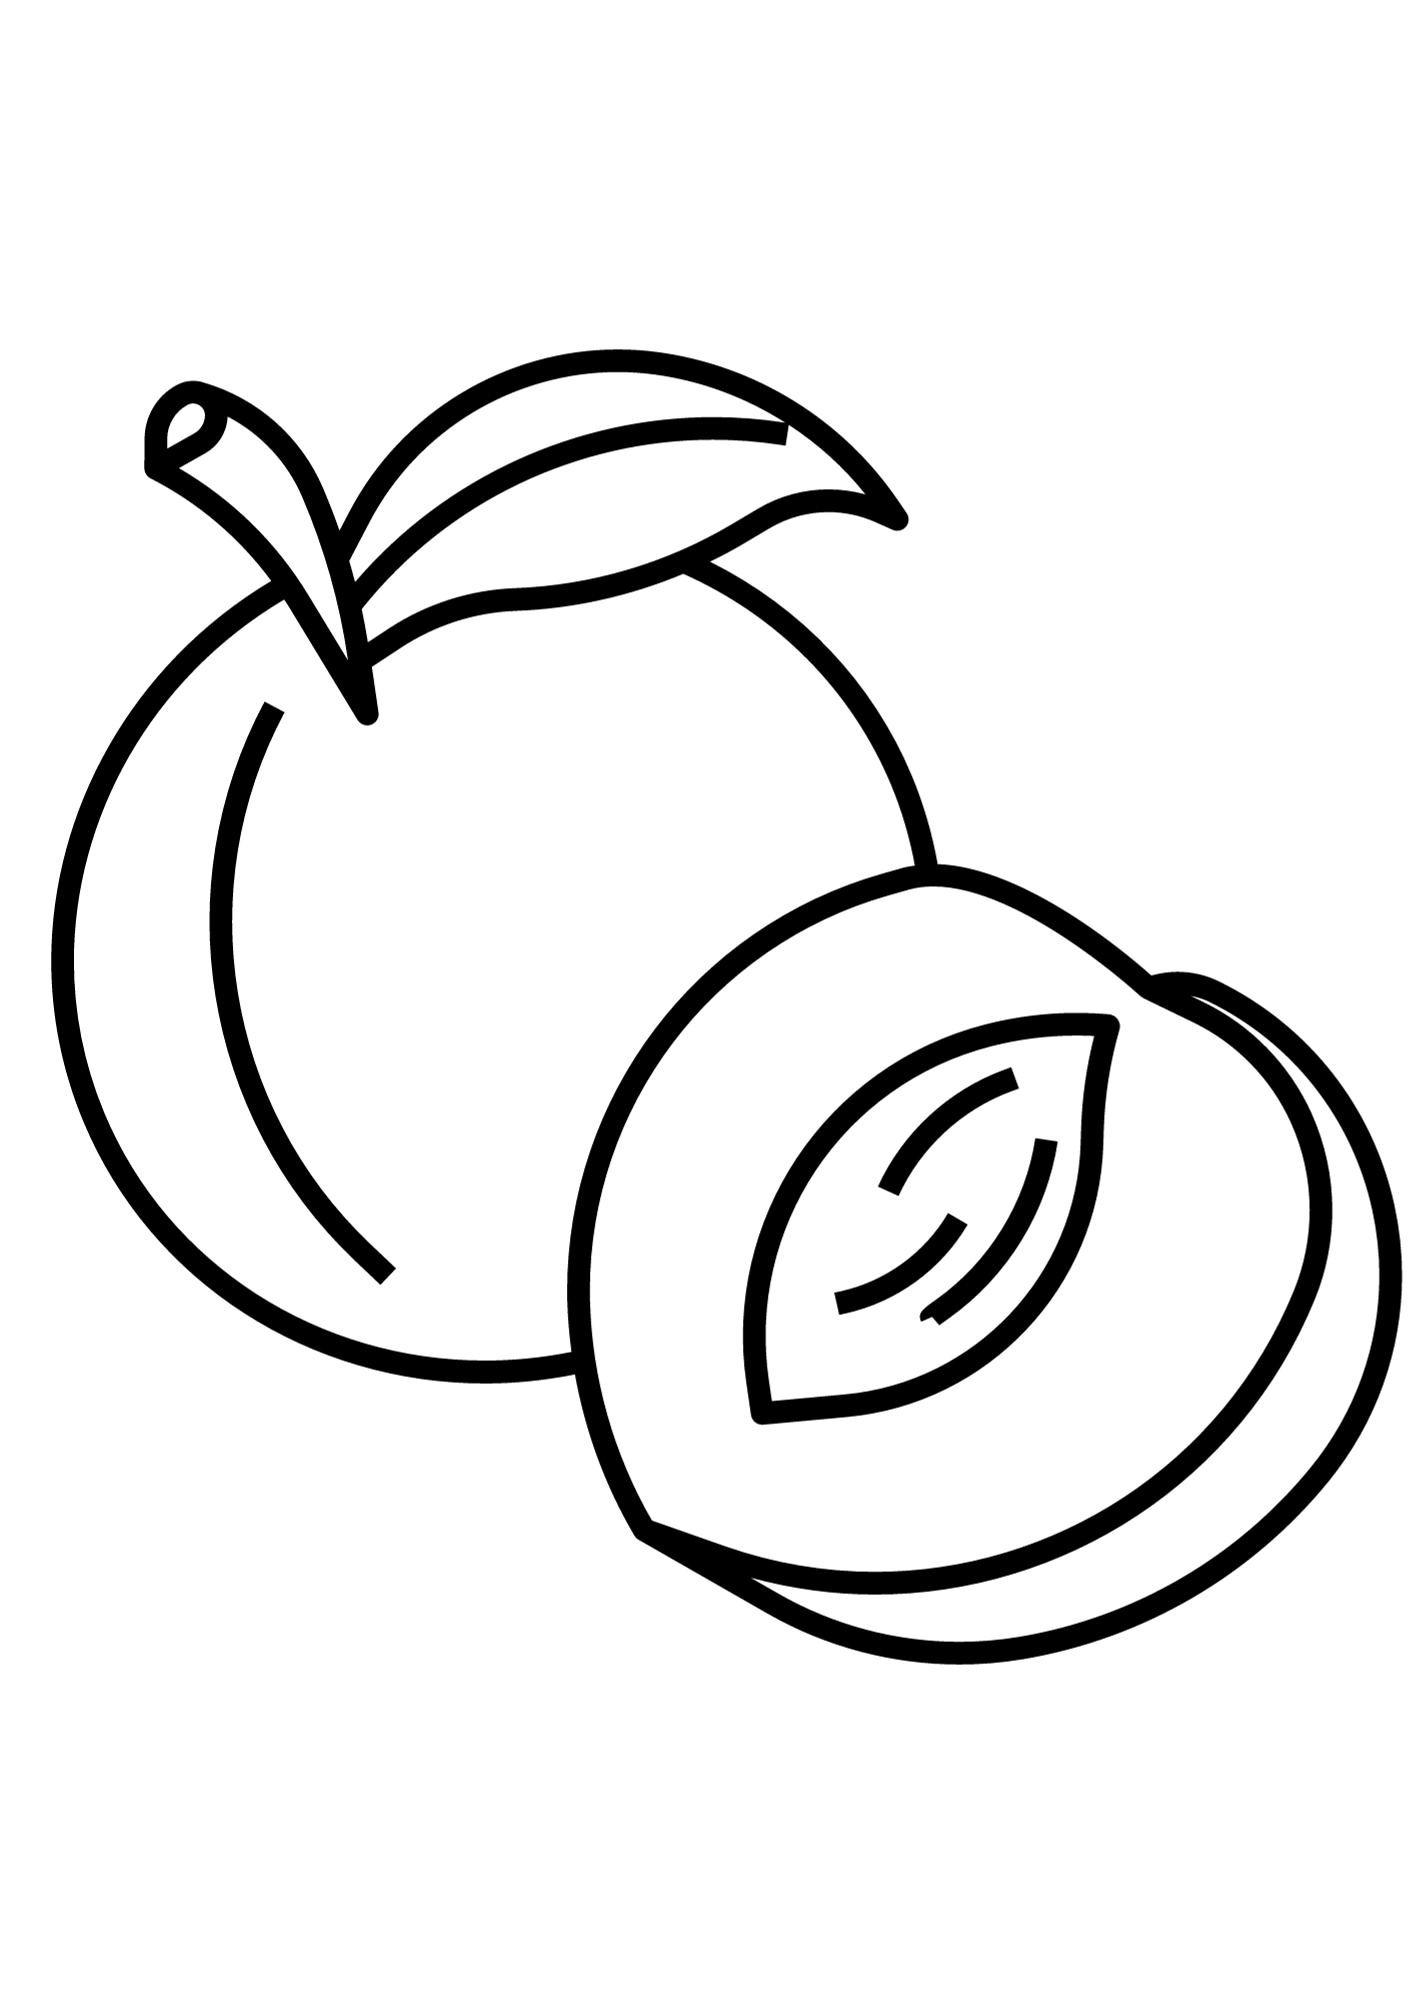 Apricot Outline Coloring Pages